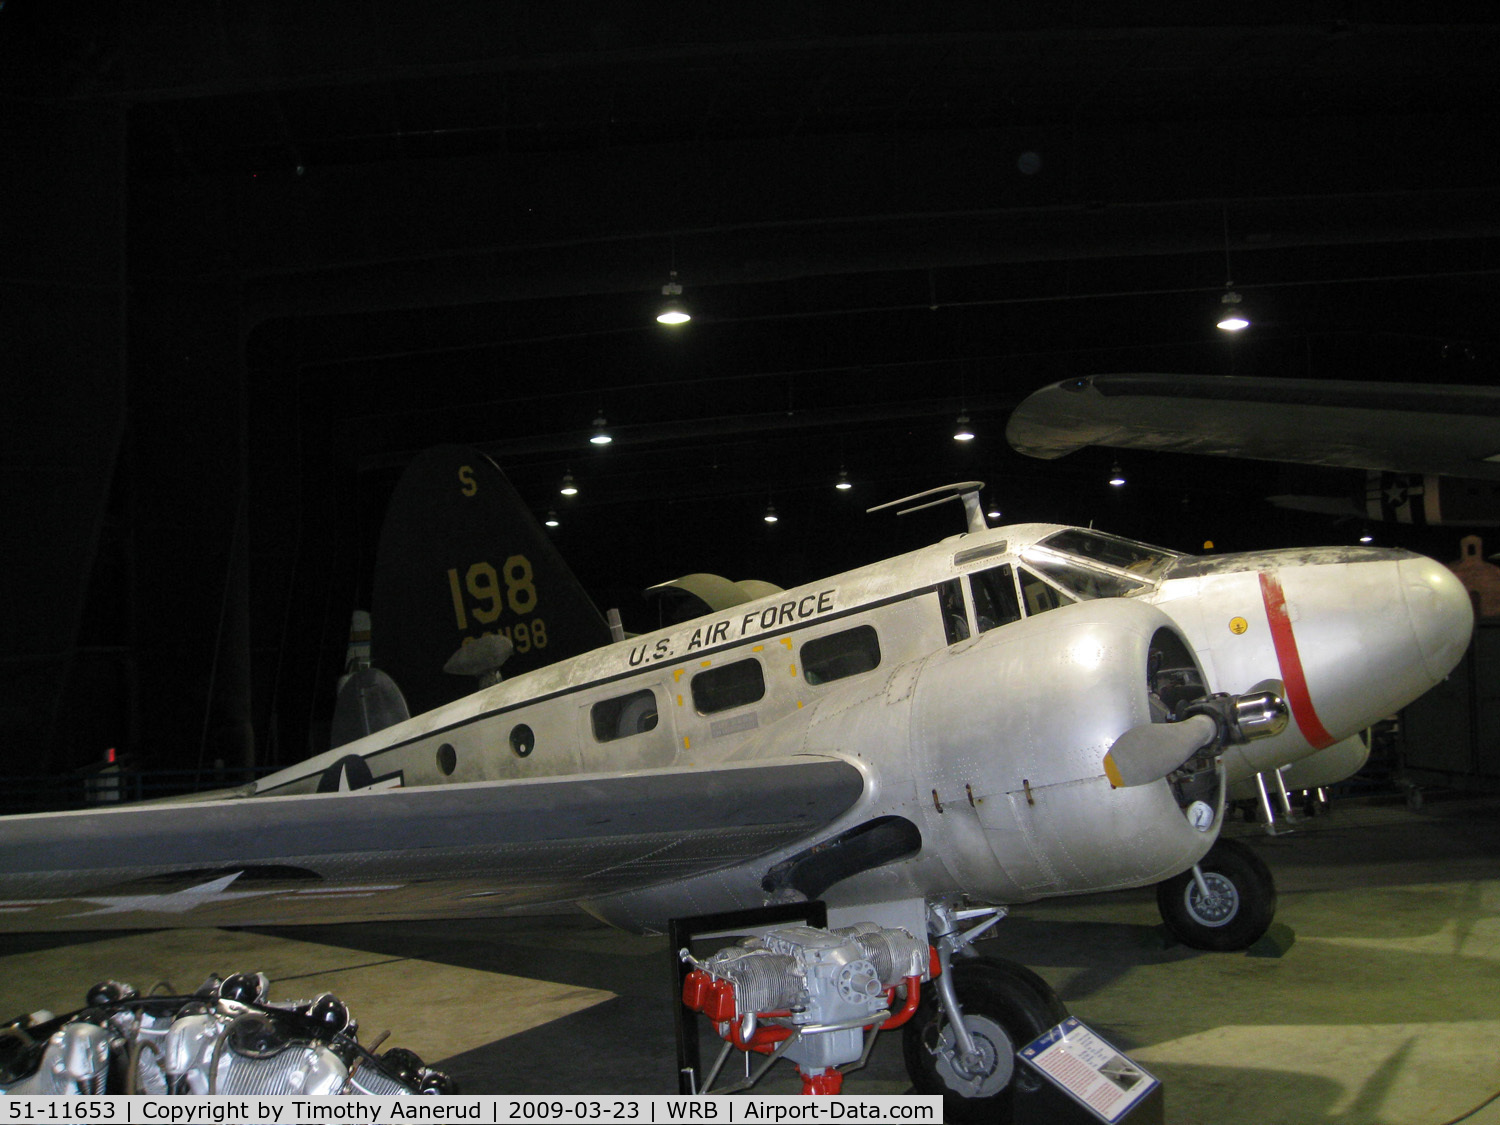 51-11653, 1951 Beech C-45G Expeditor C/N AF-210, Museum of Aviation, Robins AFB, incorrectly listed at the musuem as 52-11653